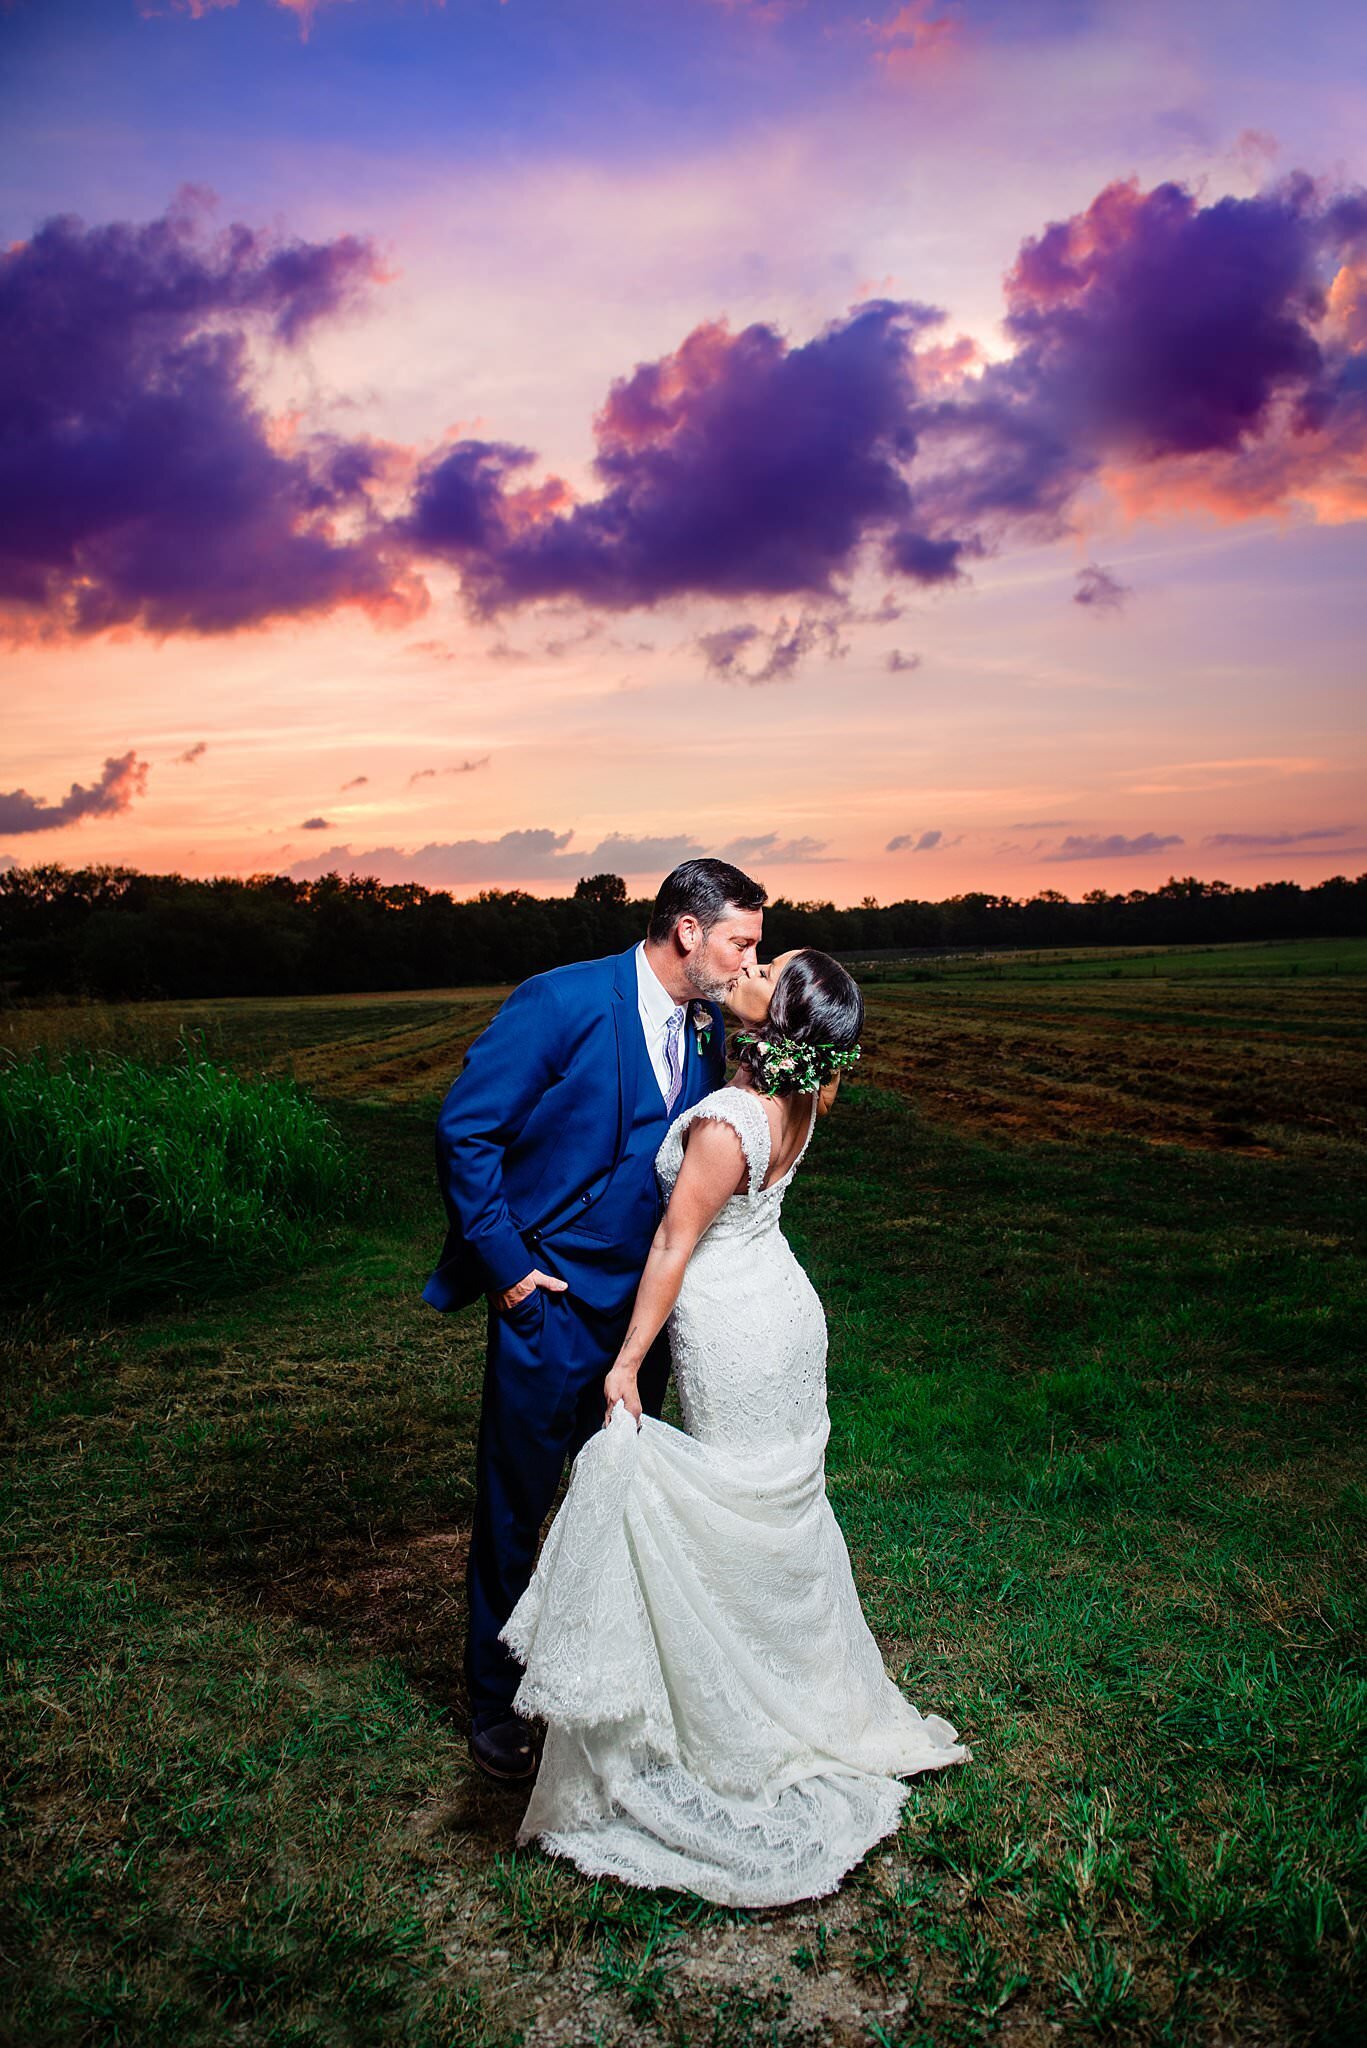 Bride holding her train and leaning into husband for a kiss during dramatic cloudy purple and pink sunset at Arrington Vineyards